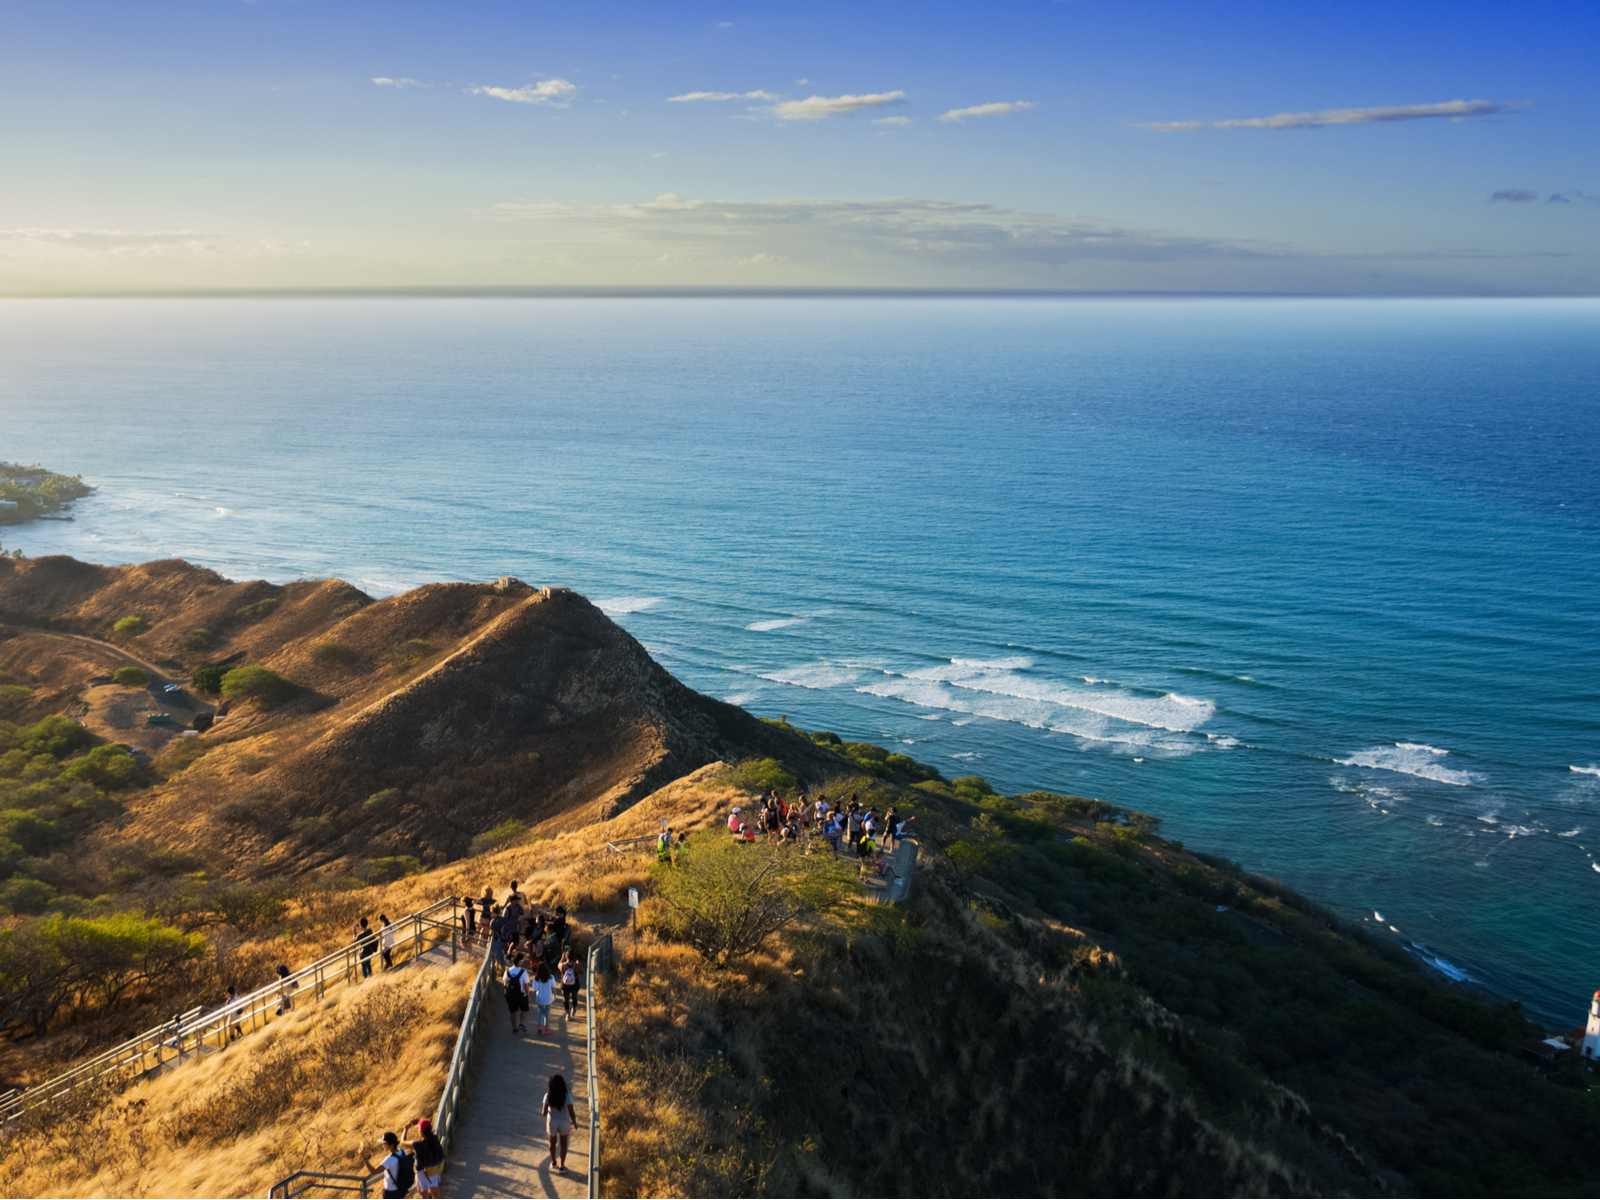 Ocean view from The Diamond Head Crater, one of the best hikes in Hawaii